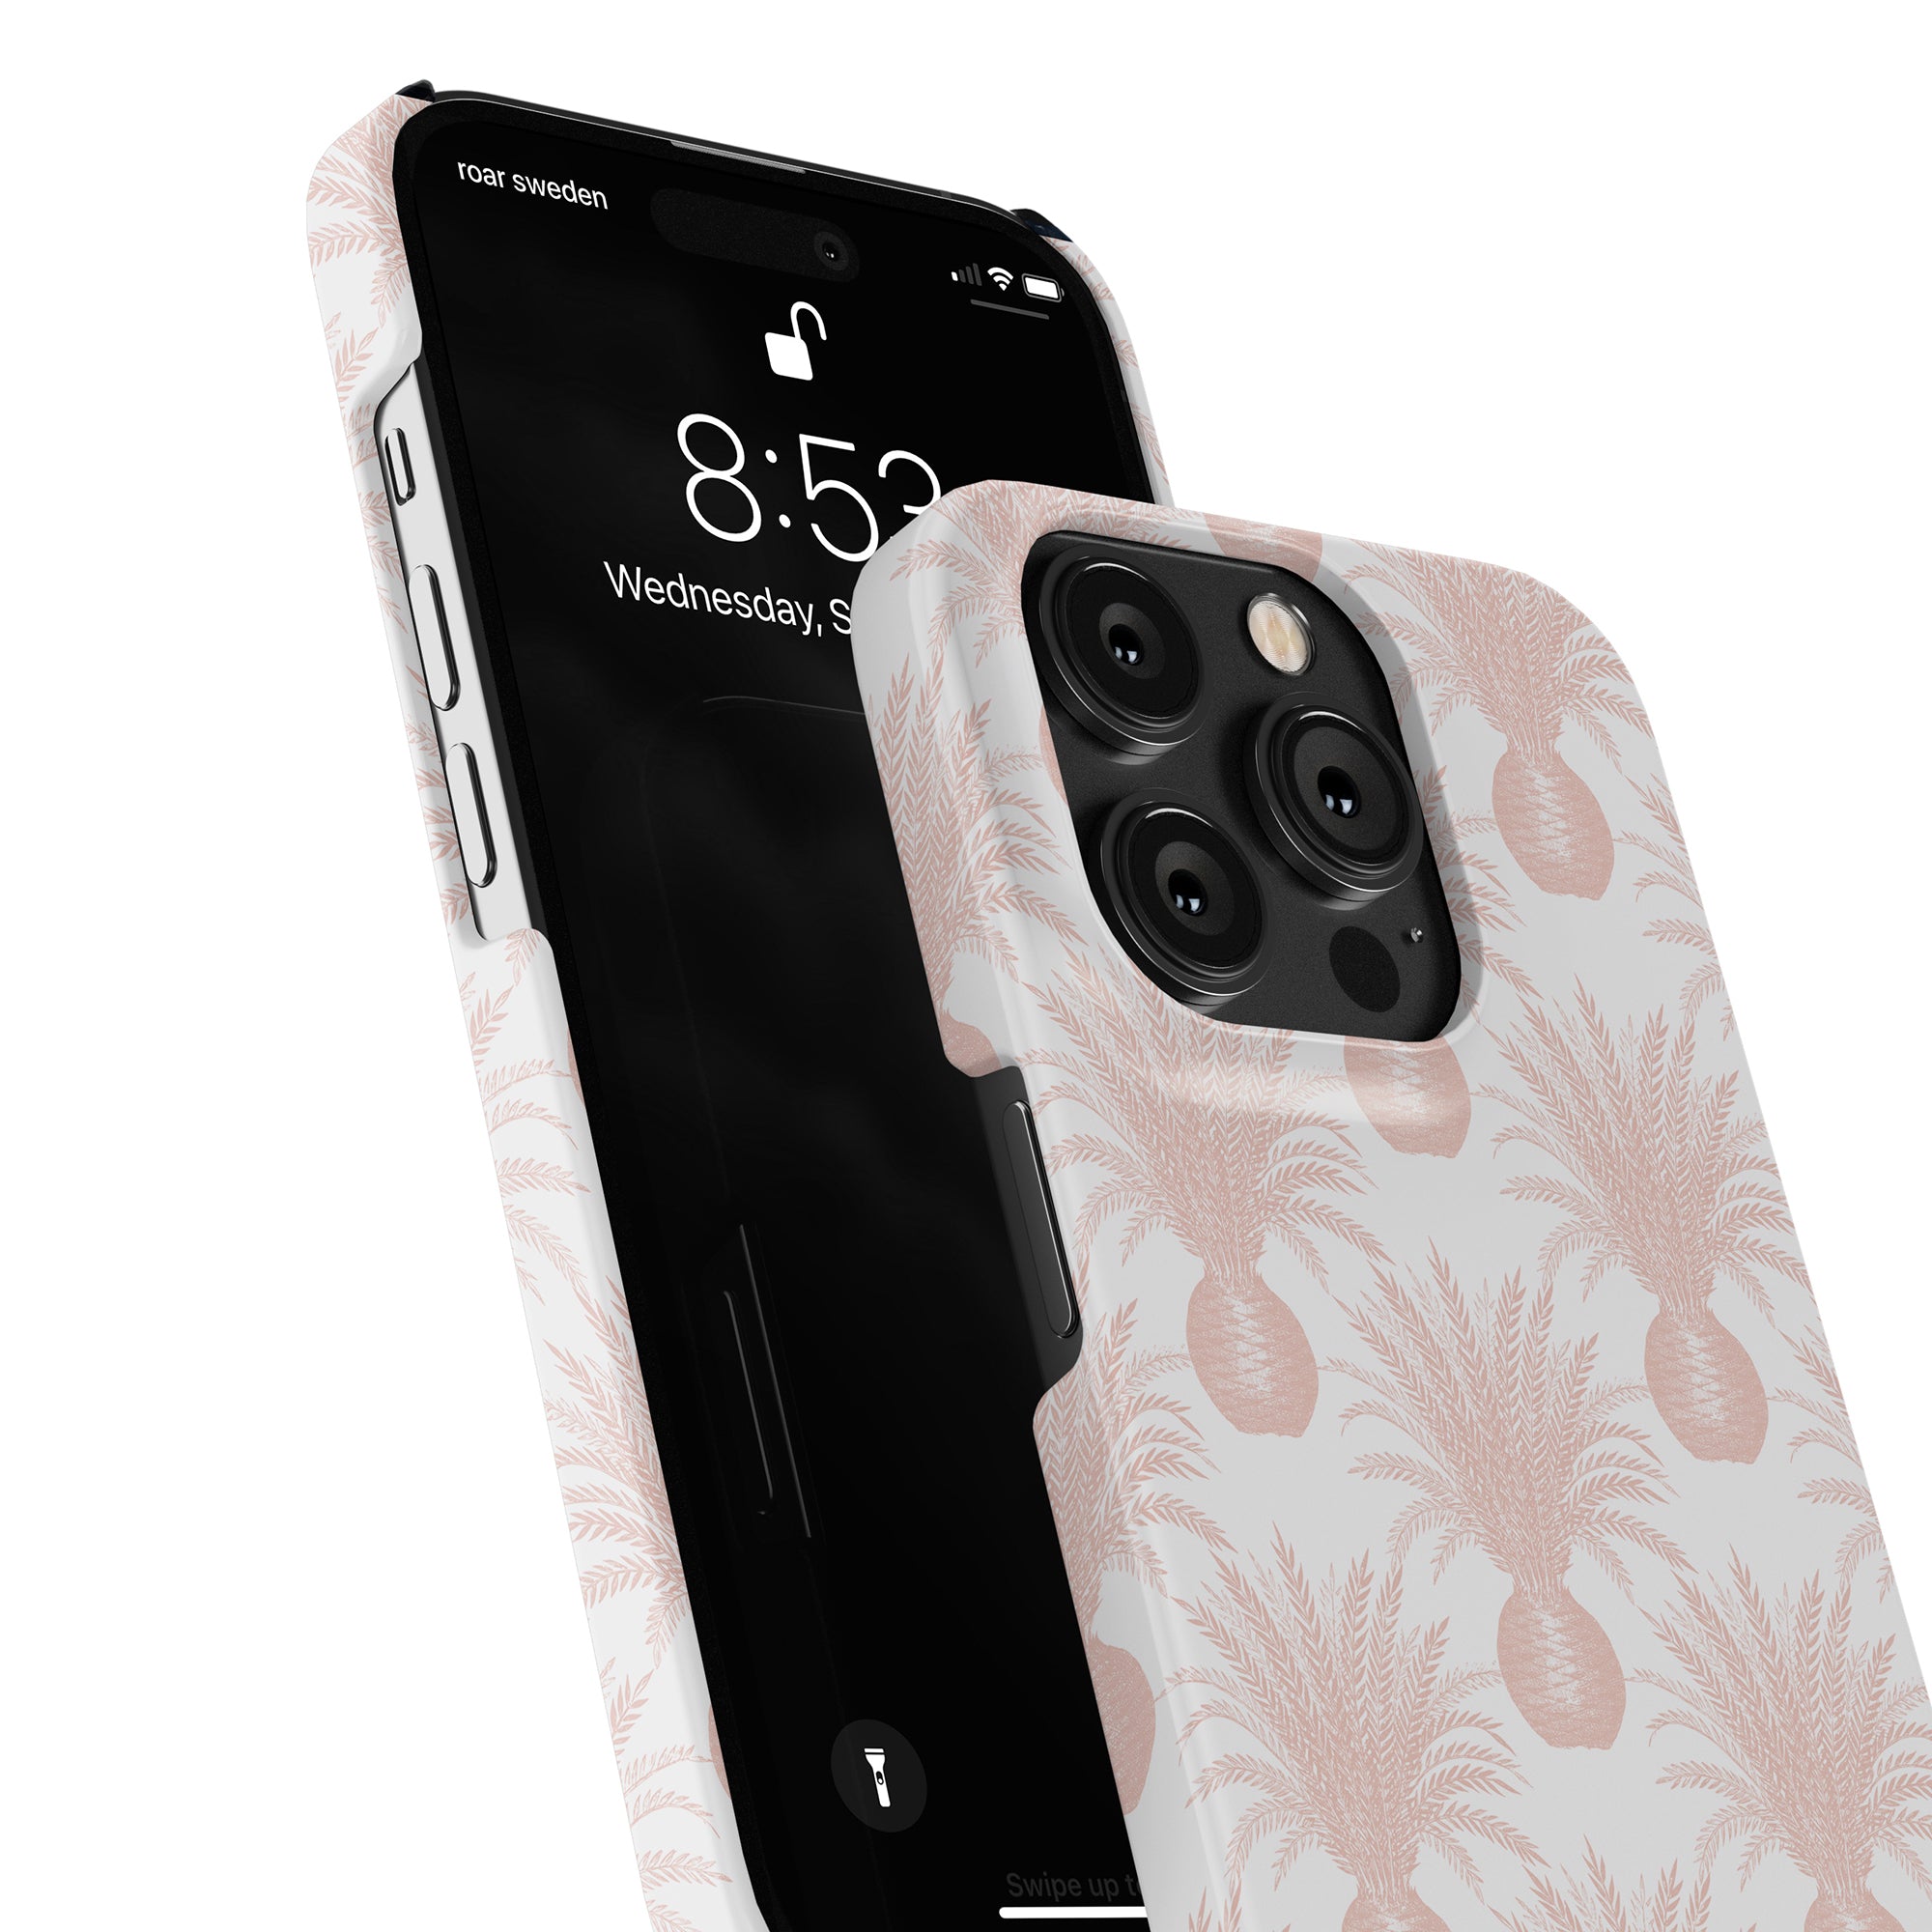 Pink Pineapple - Slim case with a triple-camera system in a waterproof protective case featuring a feather design.